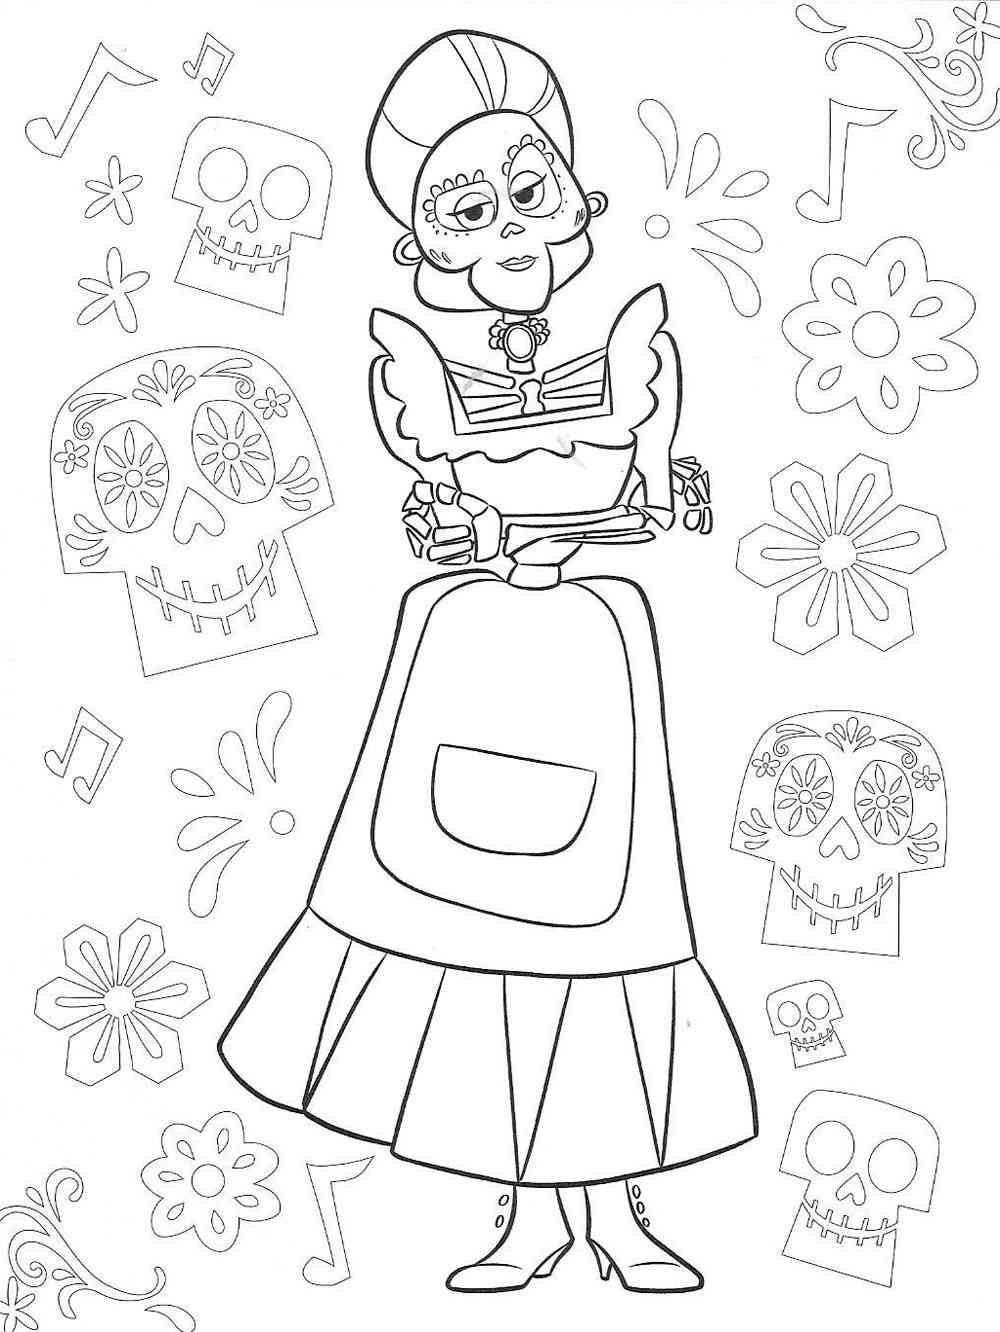 Imelda from Coco coloring page